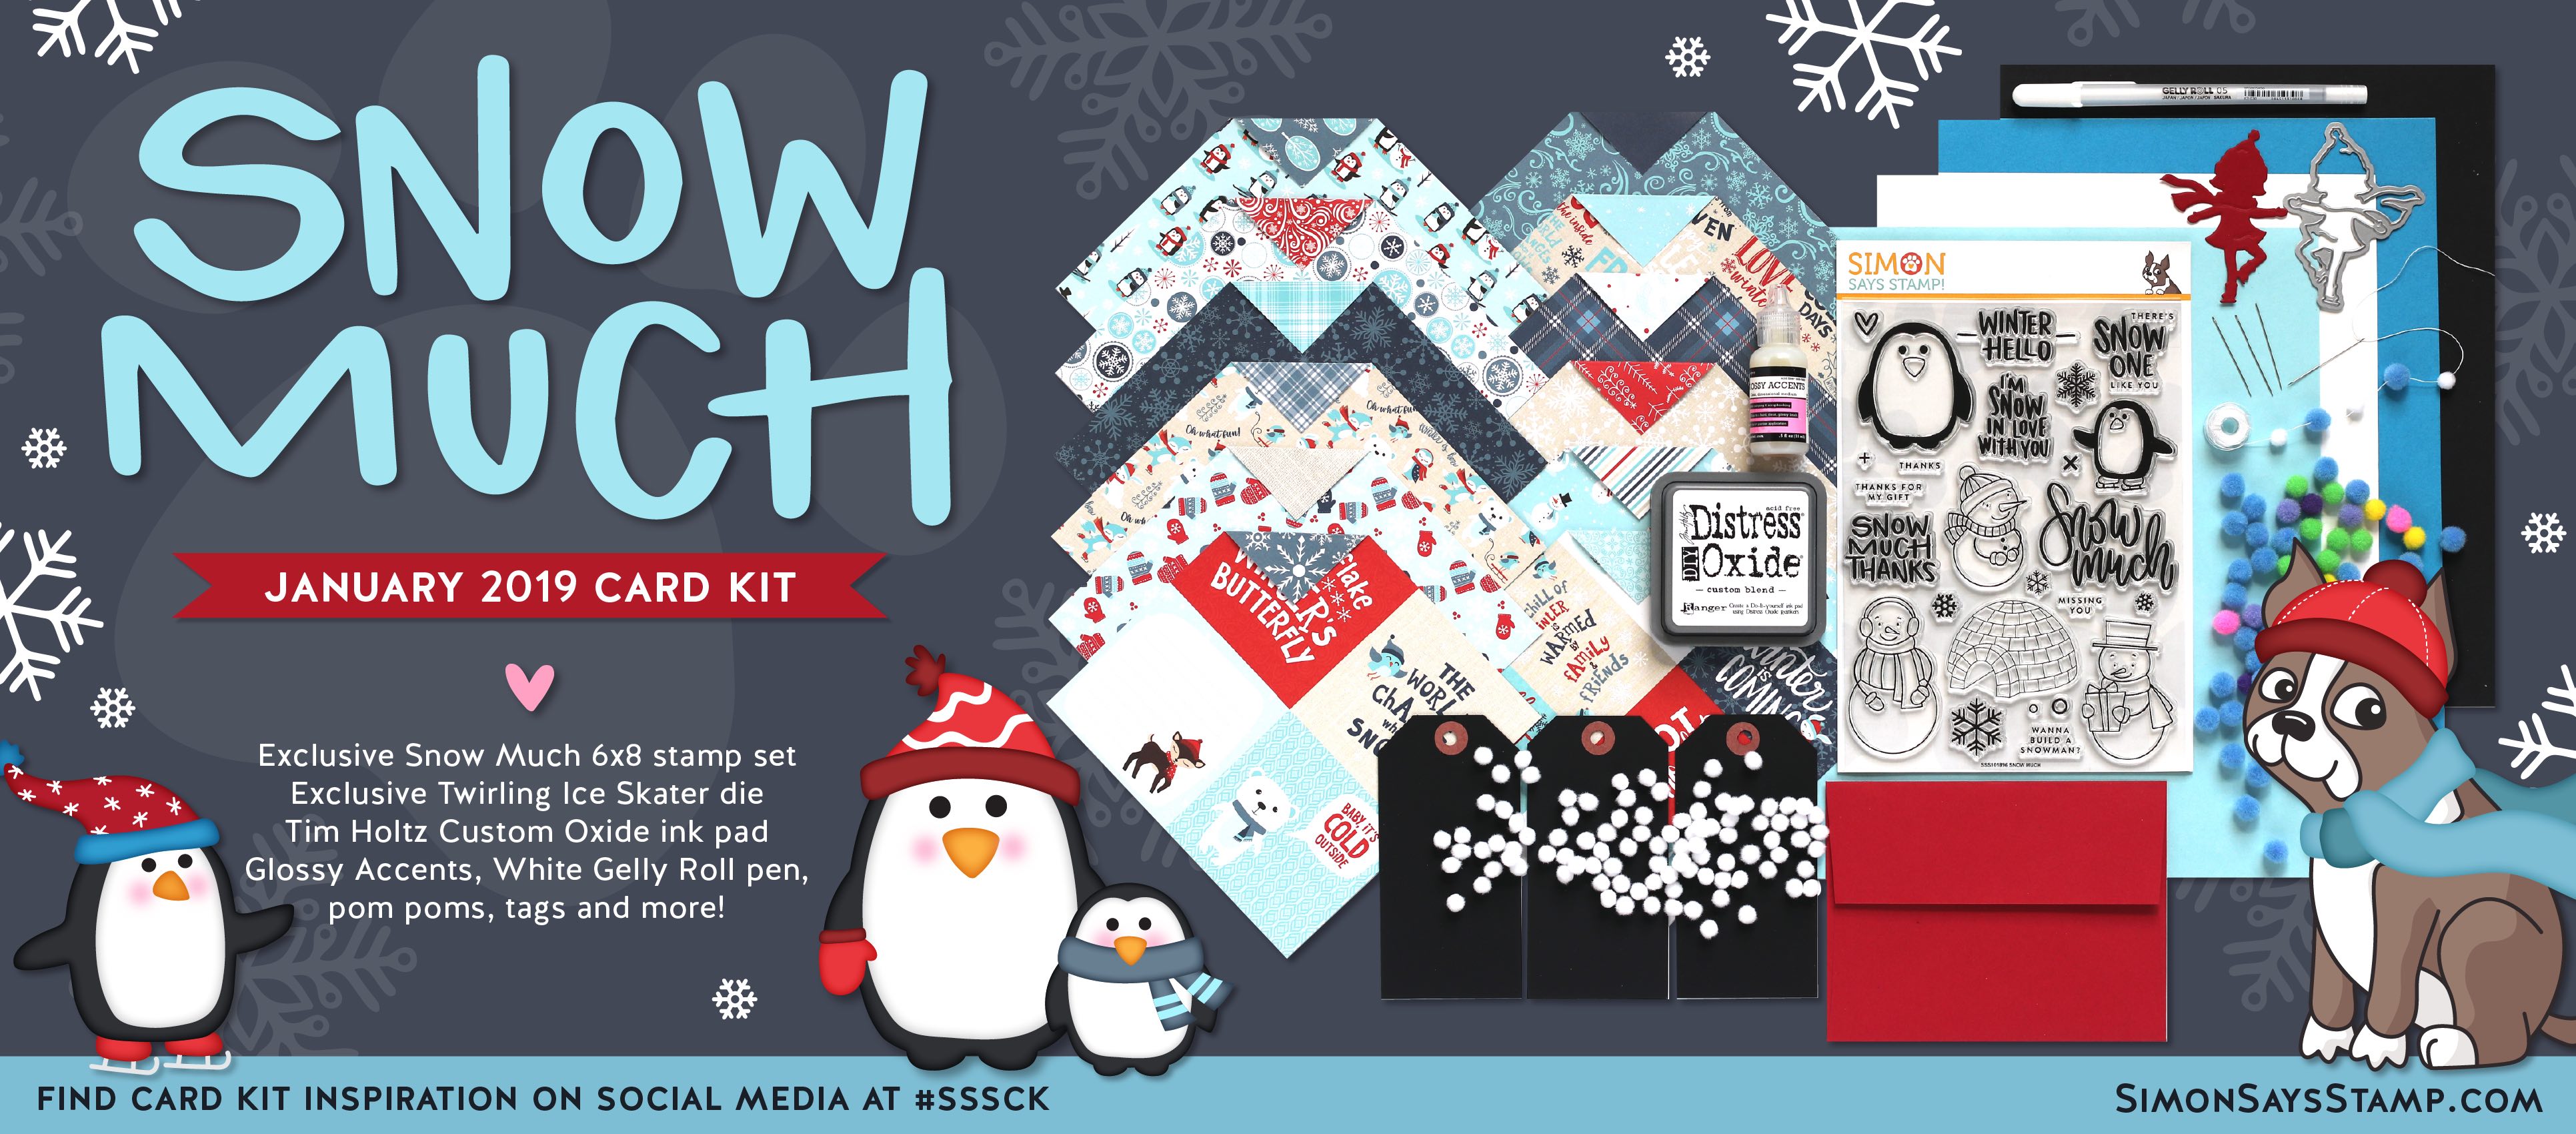 Watercoloring Die Cuts + Simon's January Card Kit Snow Much